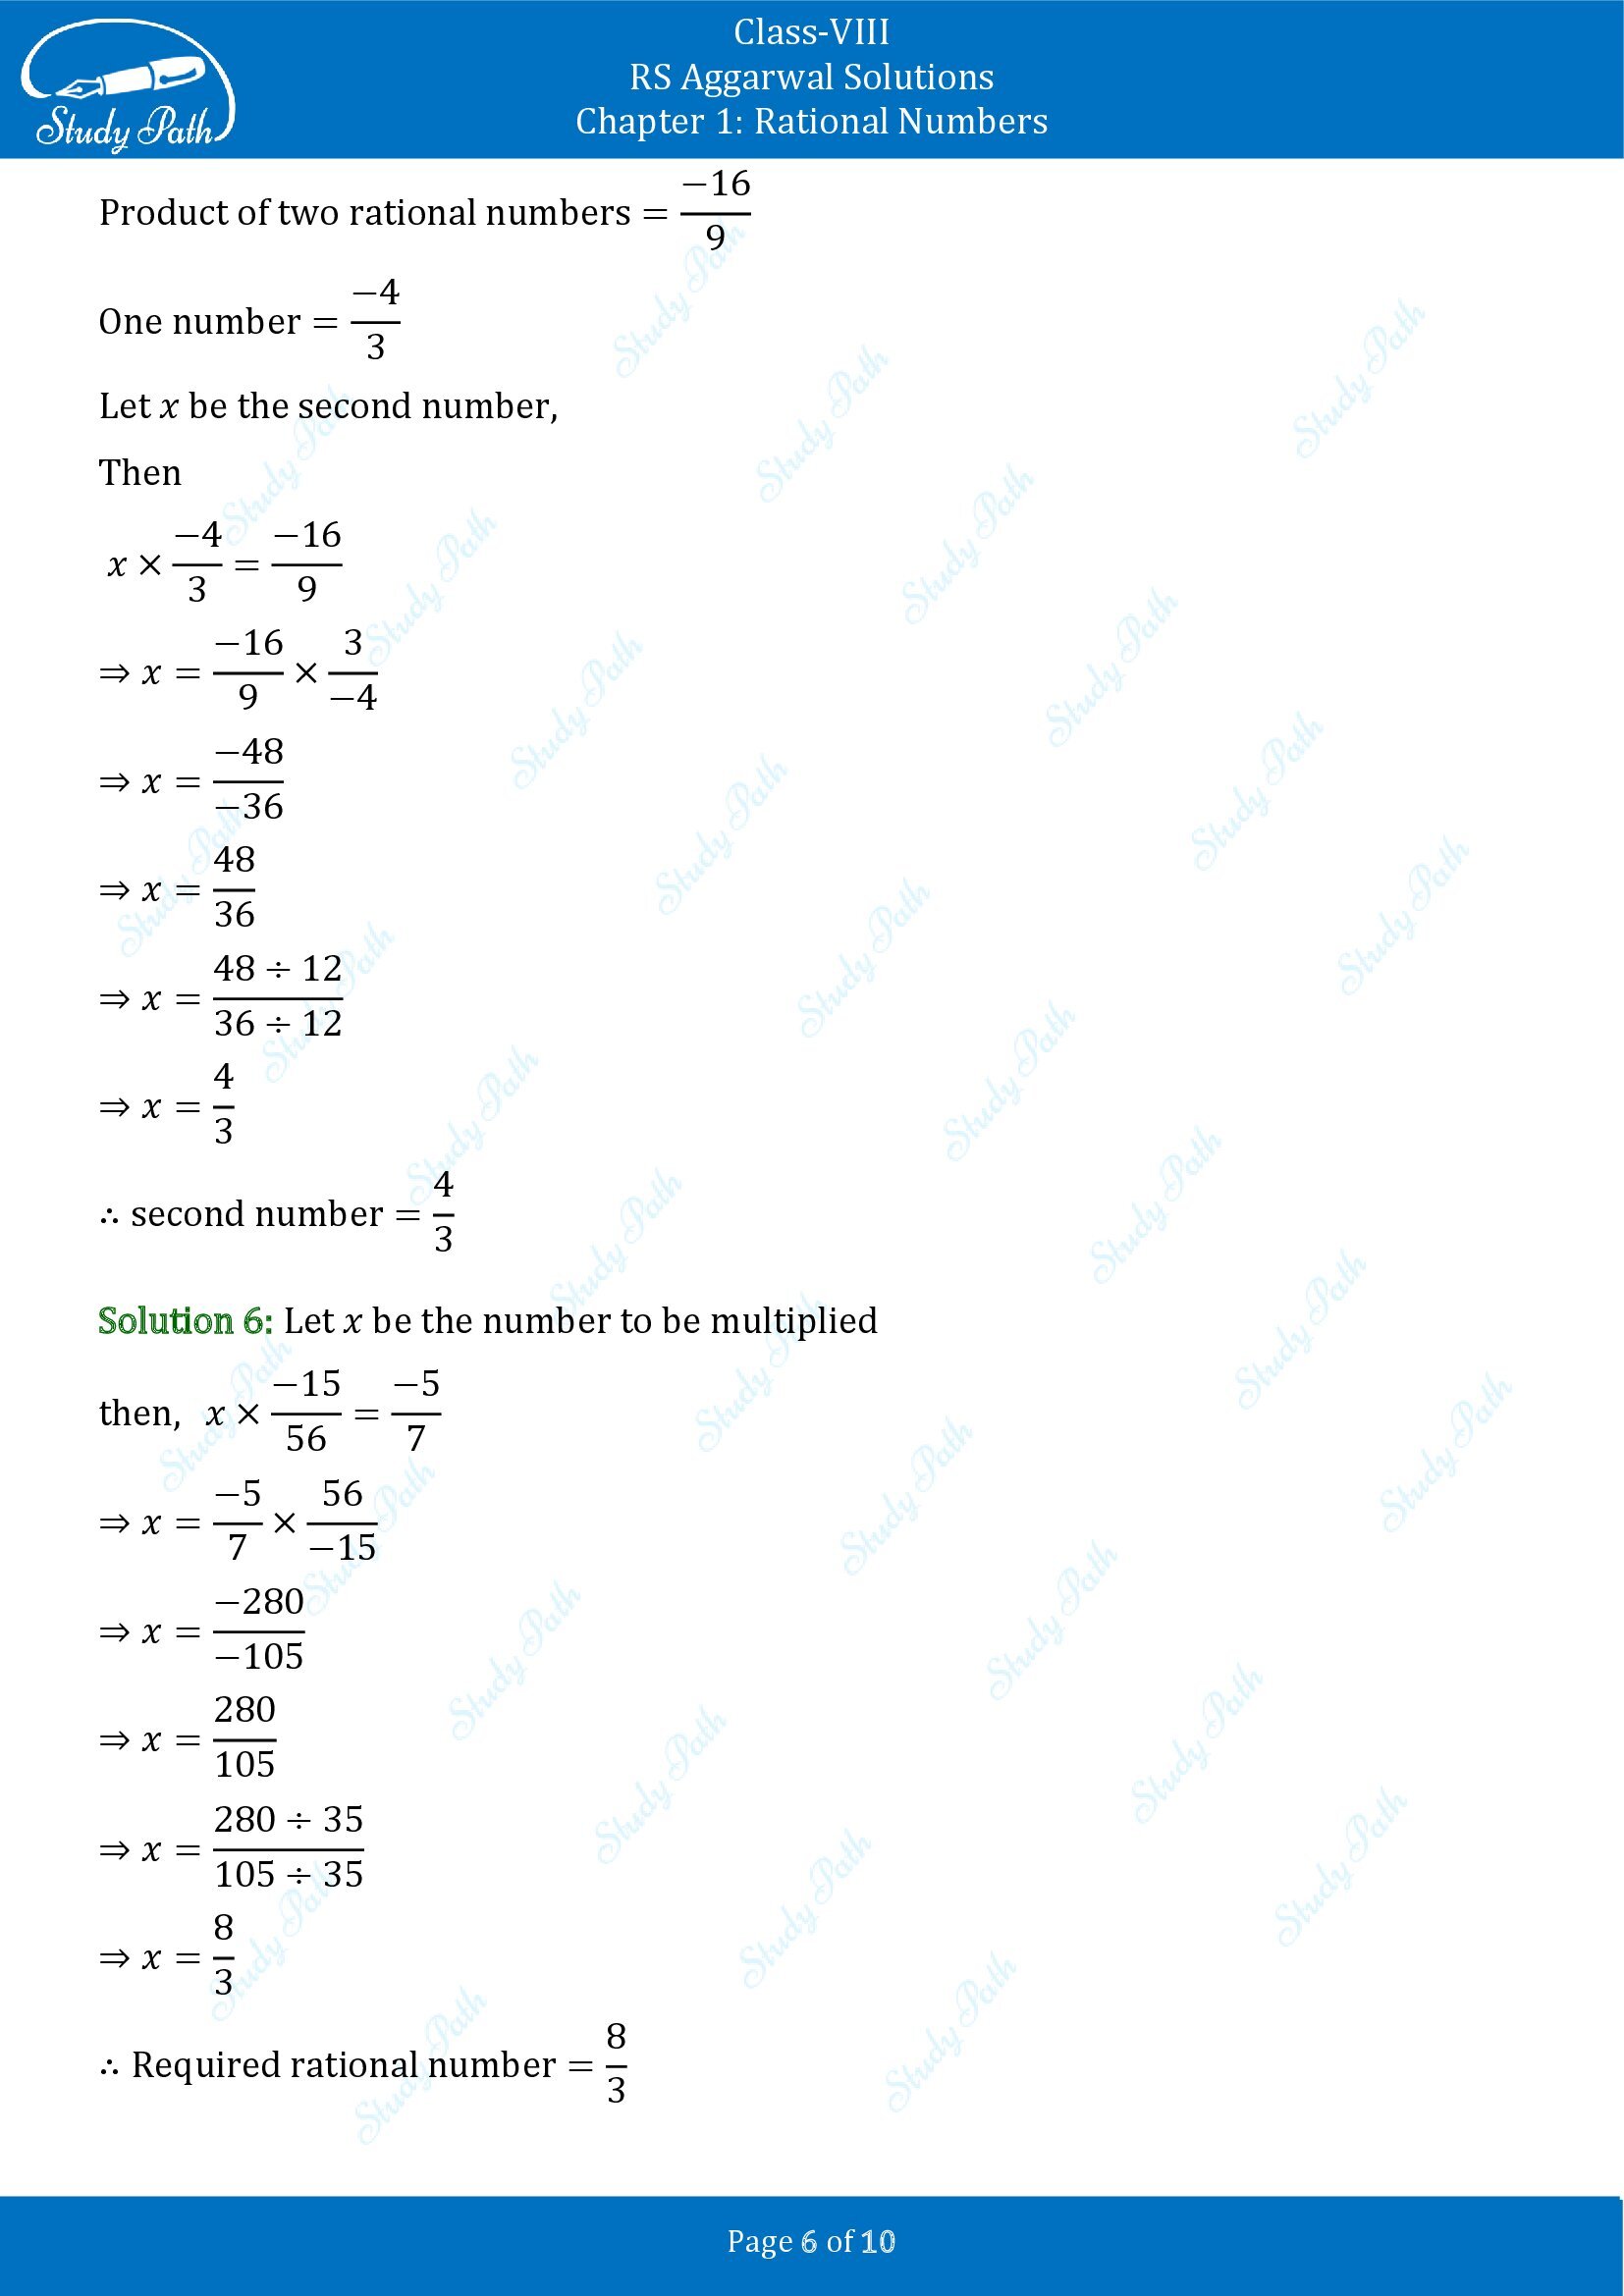 RS Aggarwal Solutions Class 8 Chapter 1 Rational Numbers Exercise 1E 00006